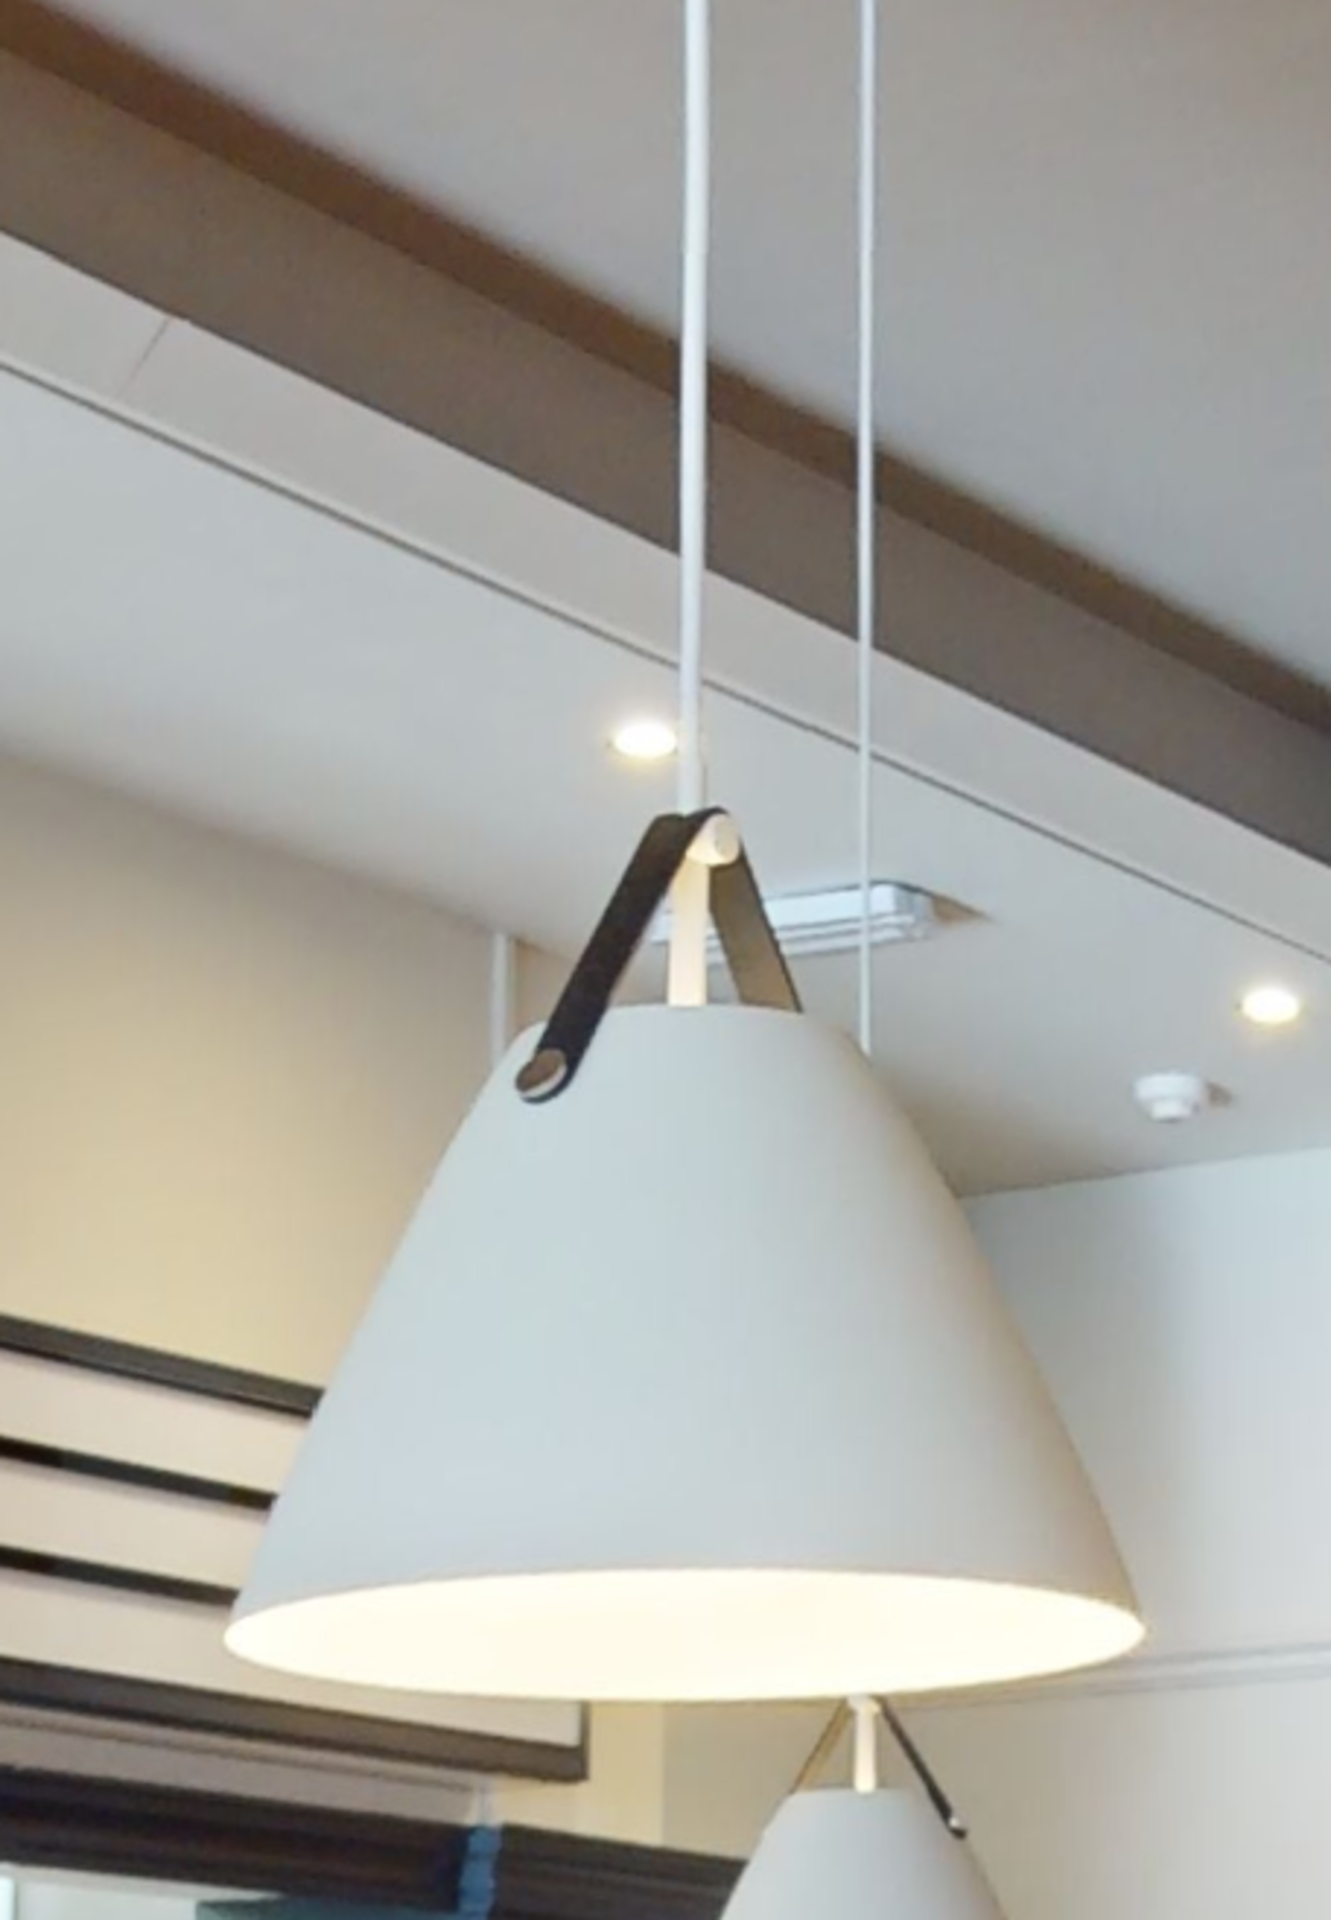 6 x Suspending Ceiling Pendant Lights Featuring Beige Metal Shades With Brown Leather Straps